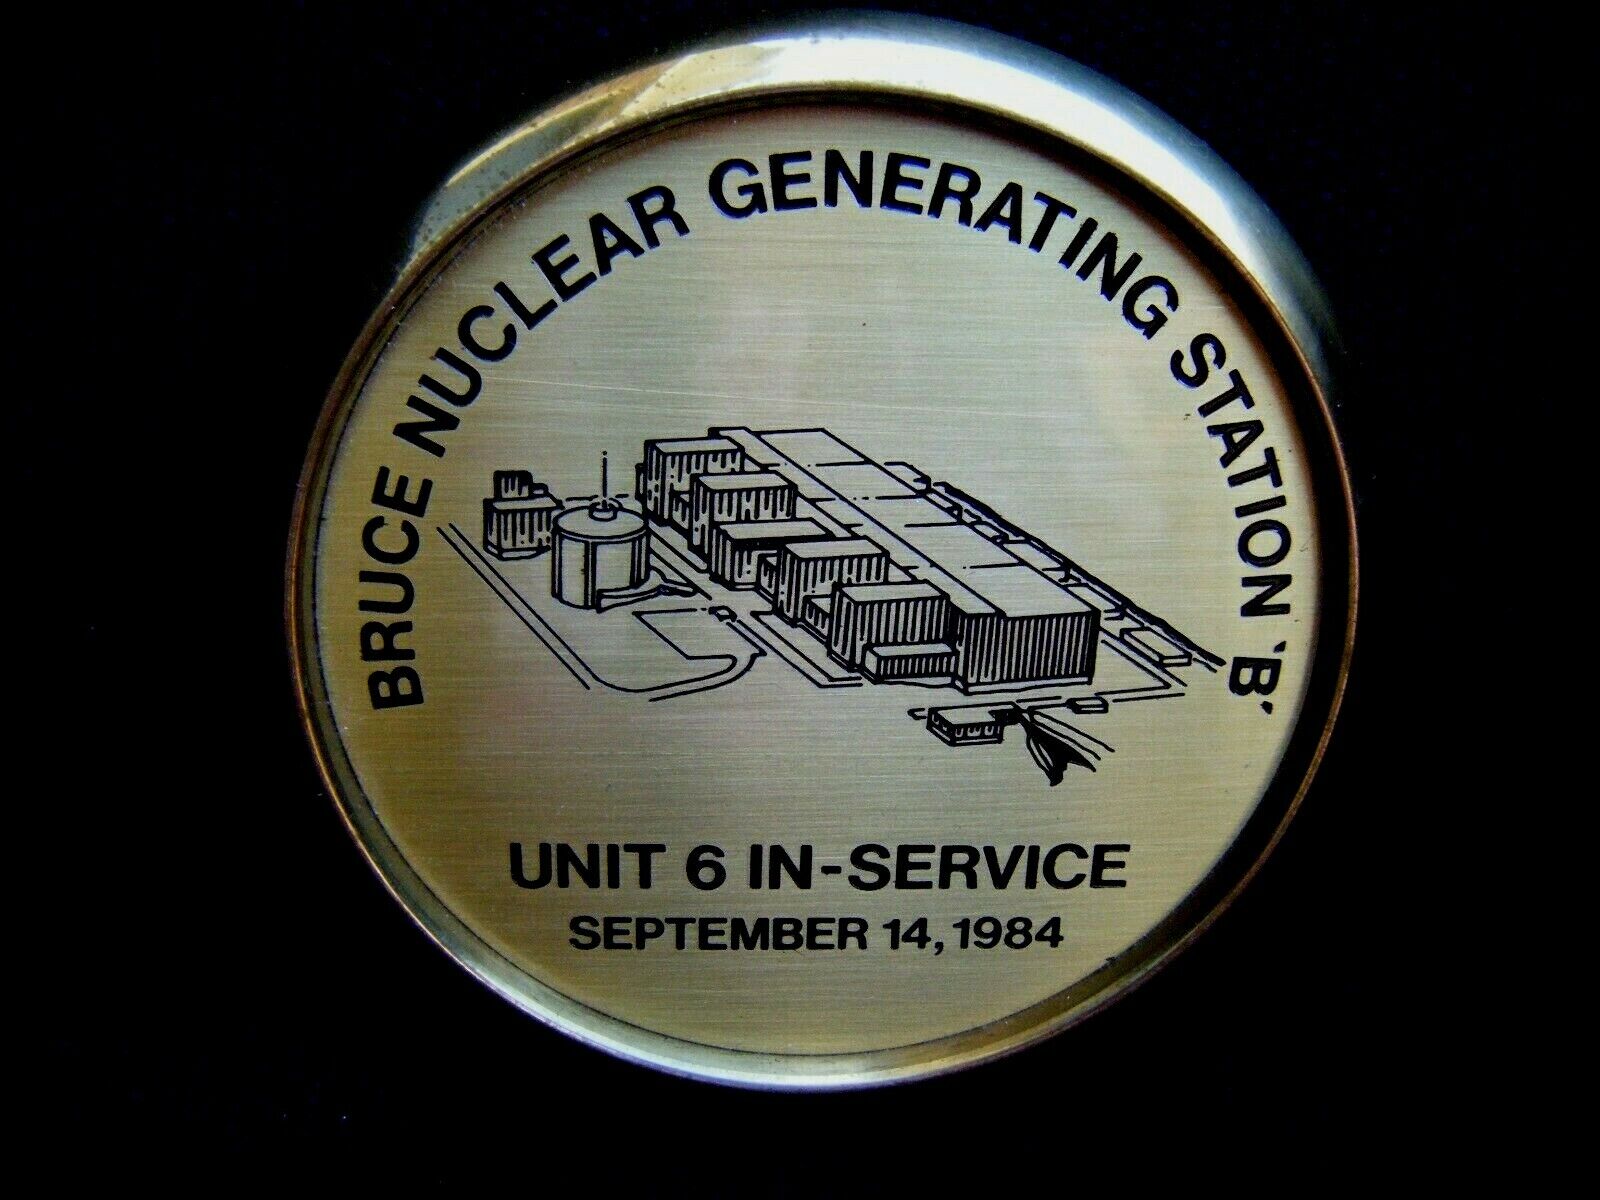 Nuclear Power Plant Bruce Generating Station Brass Coaster 1984